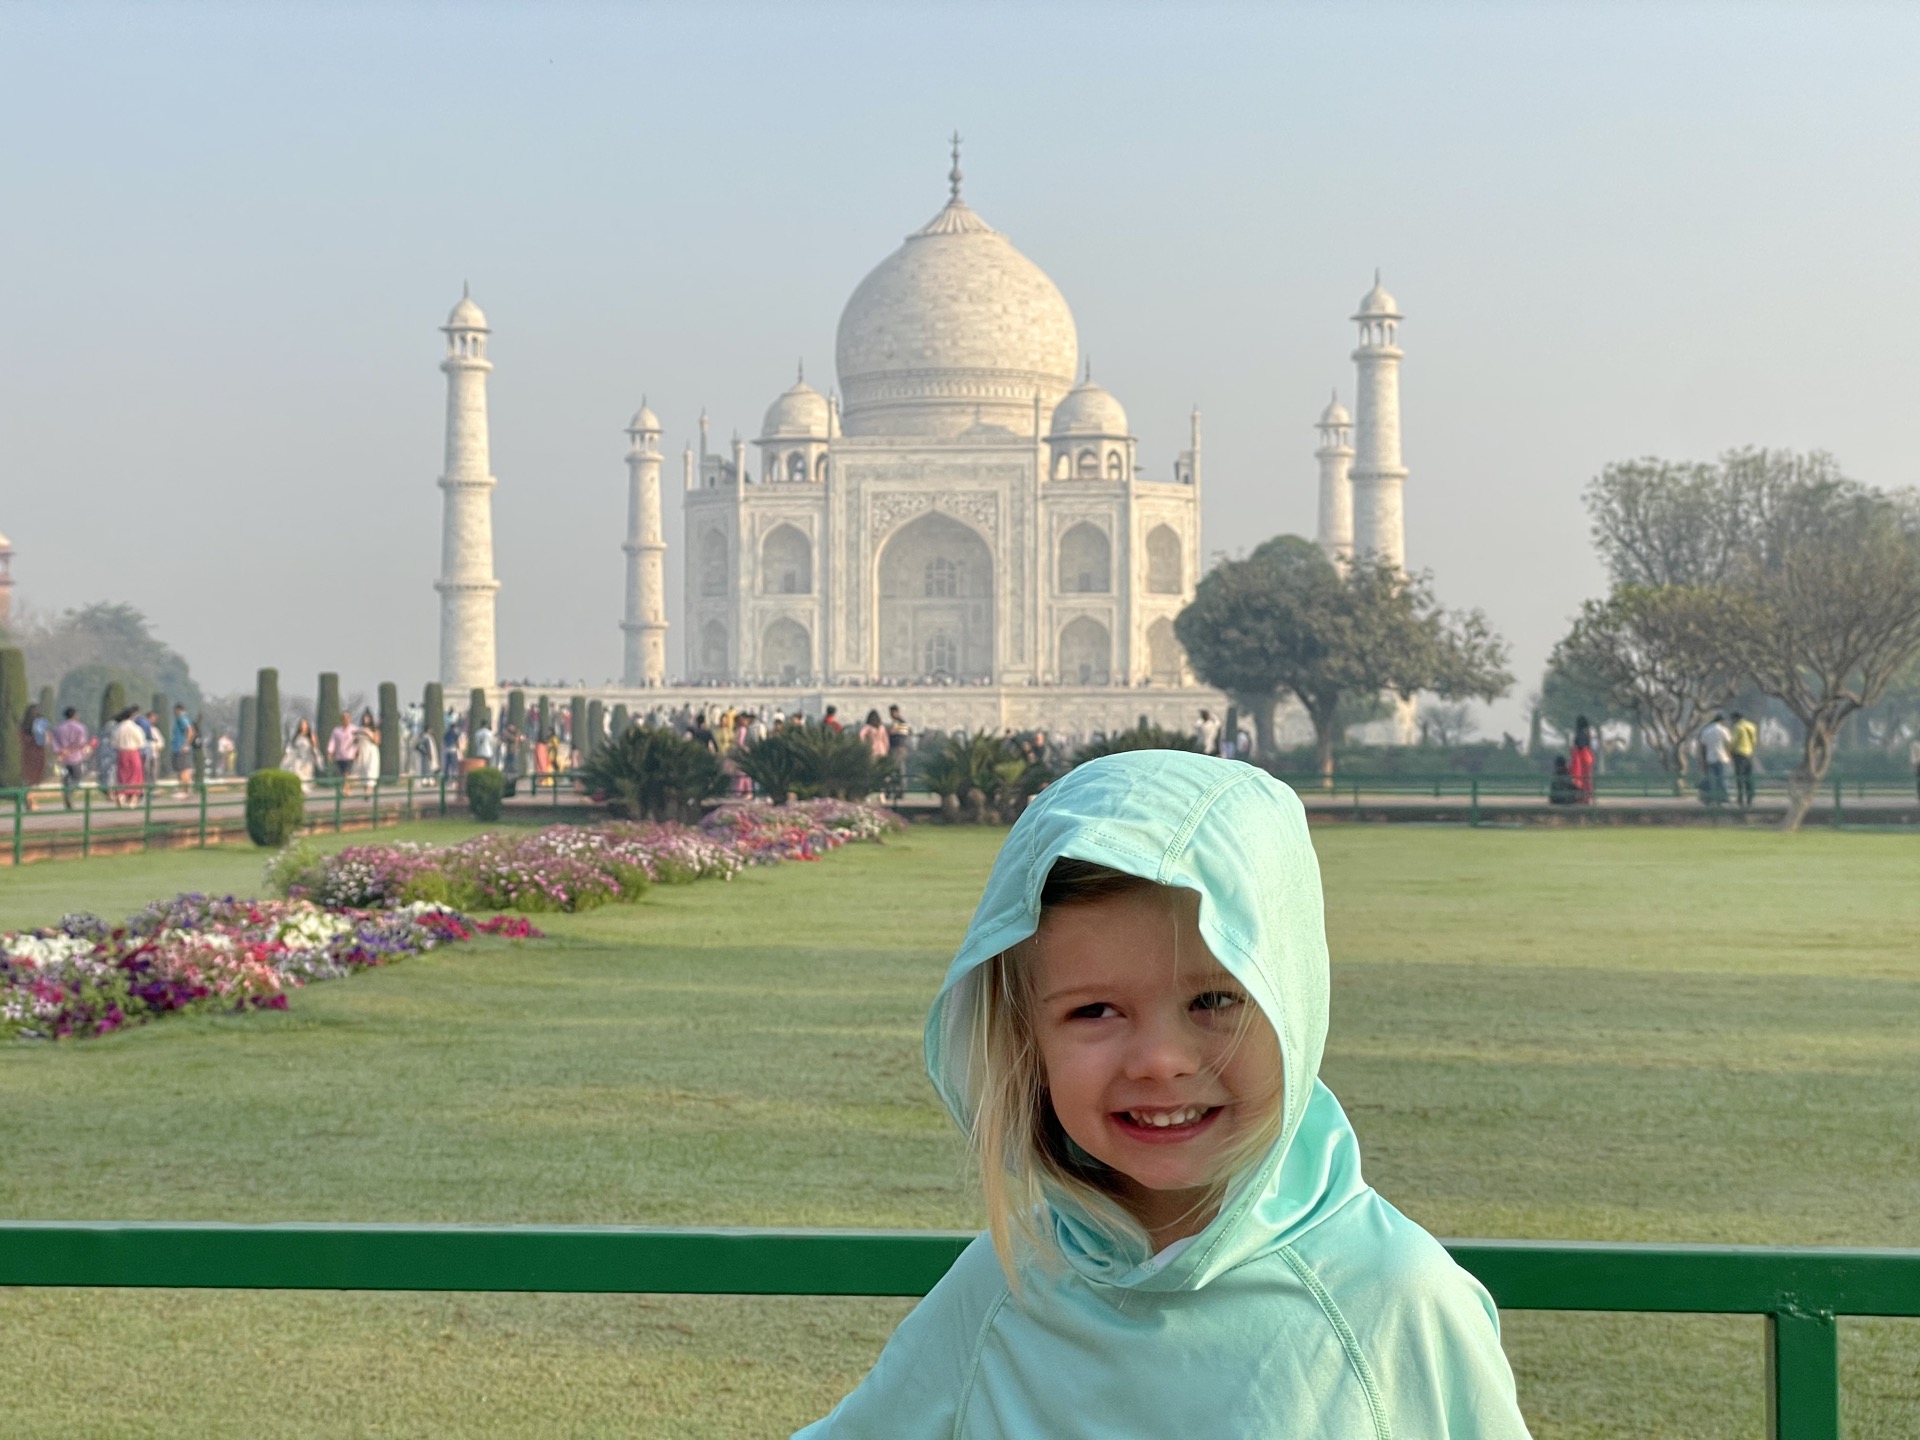 travel food ideas for toddlers india